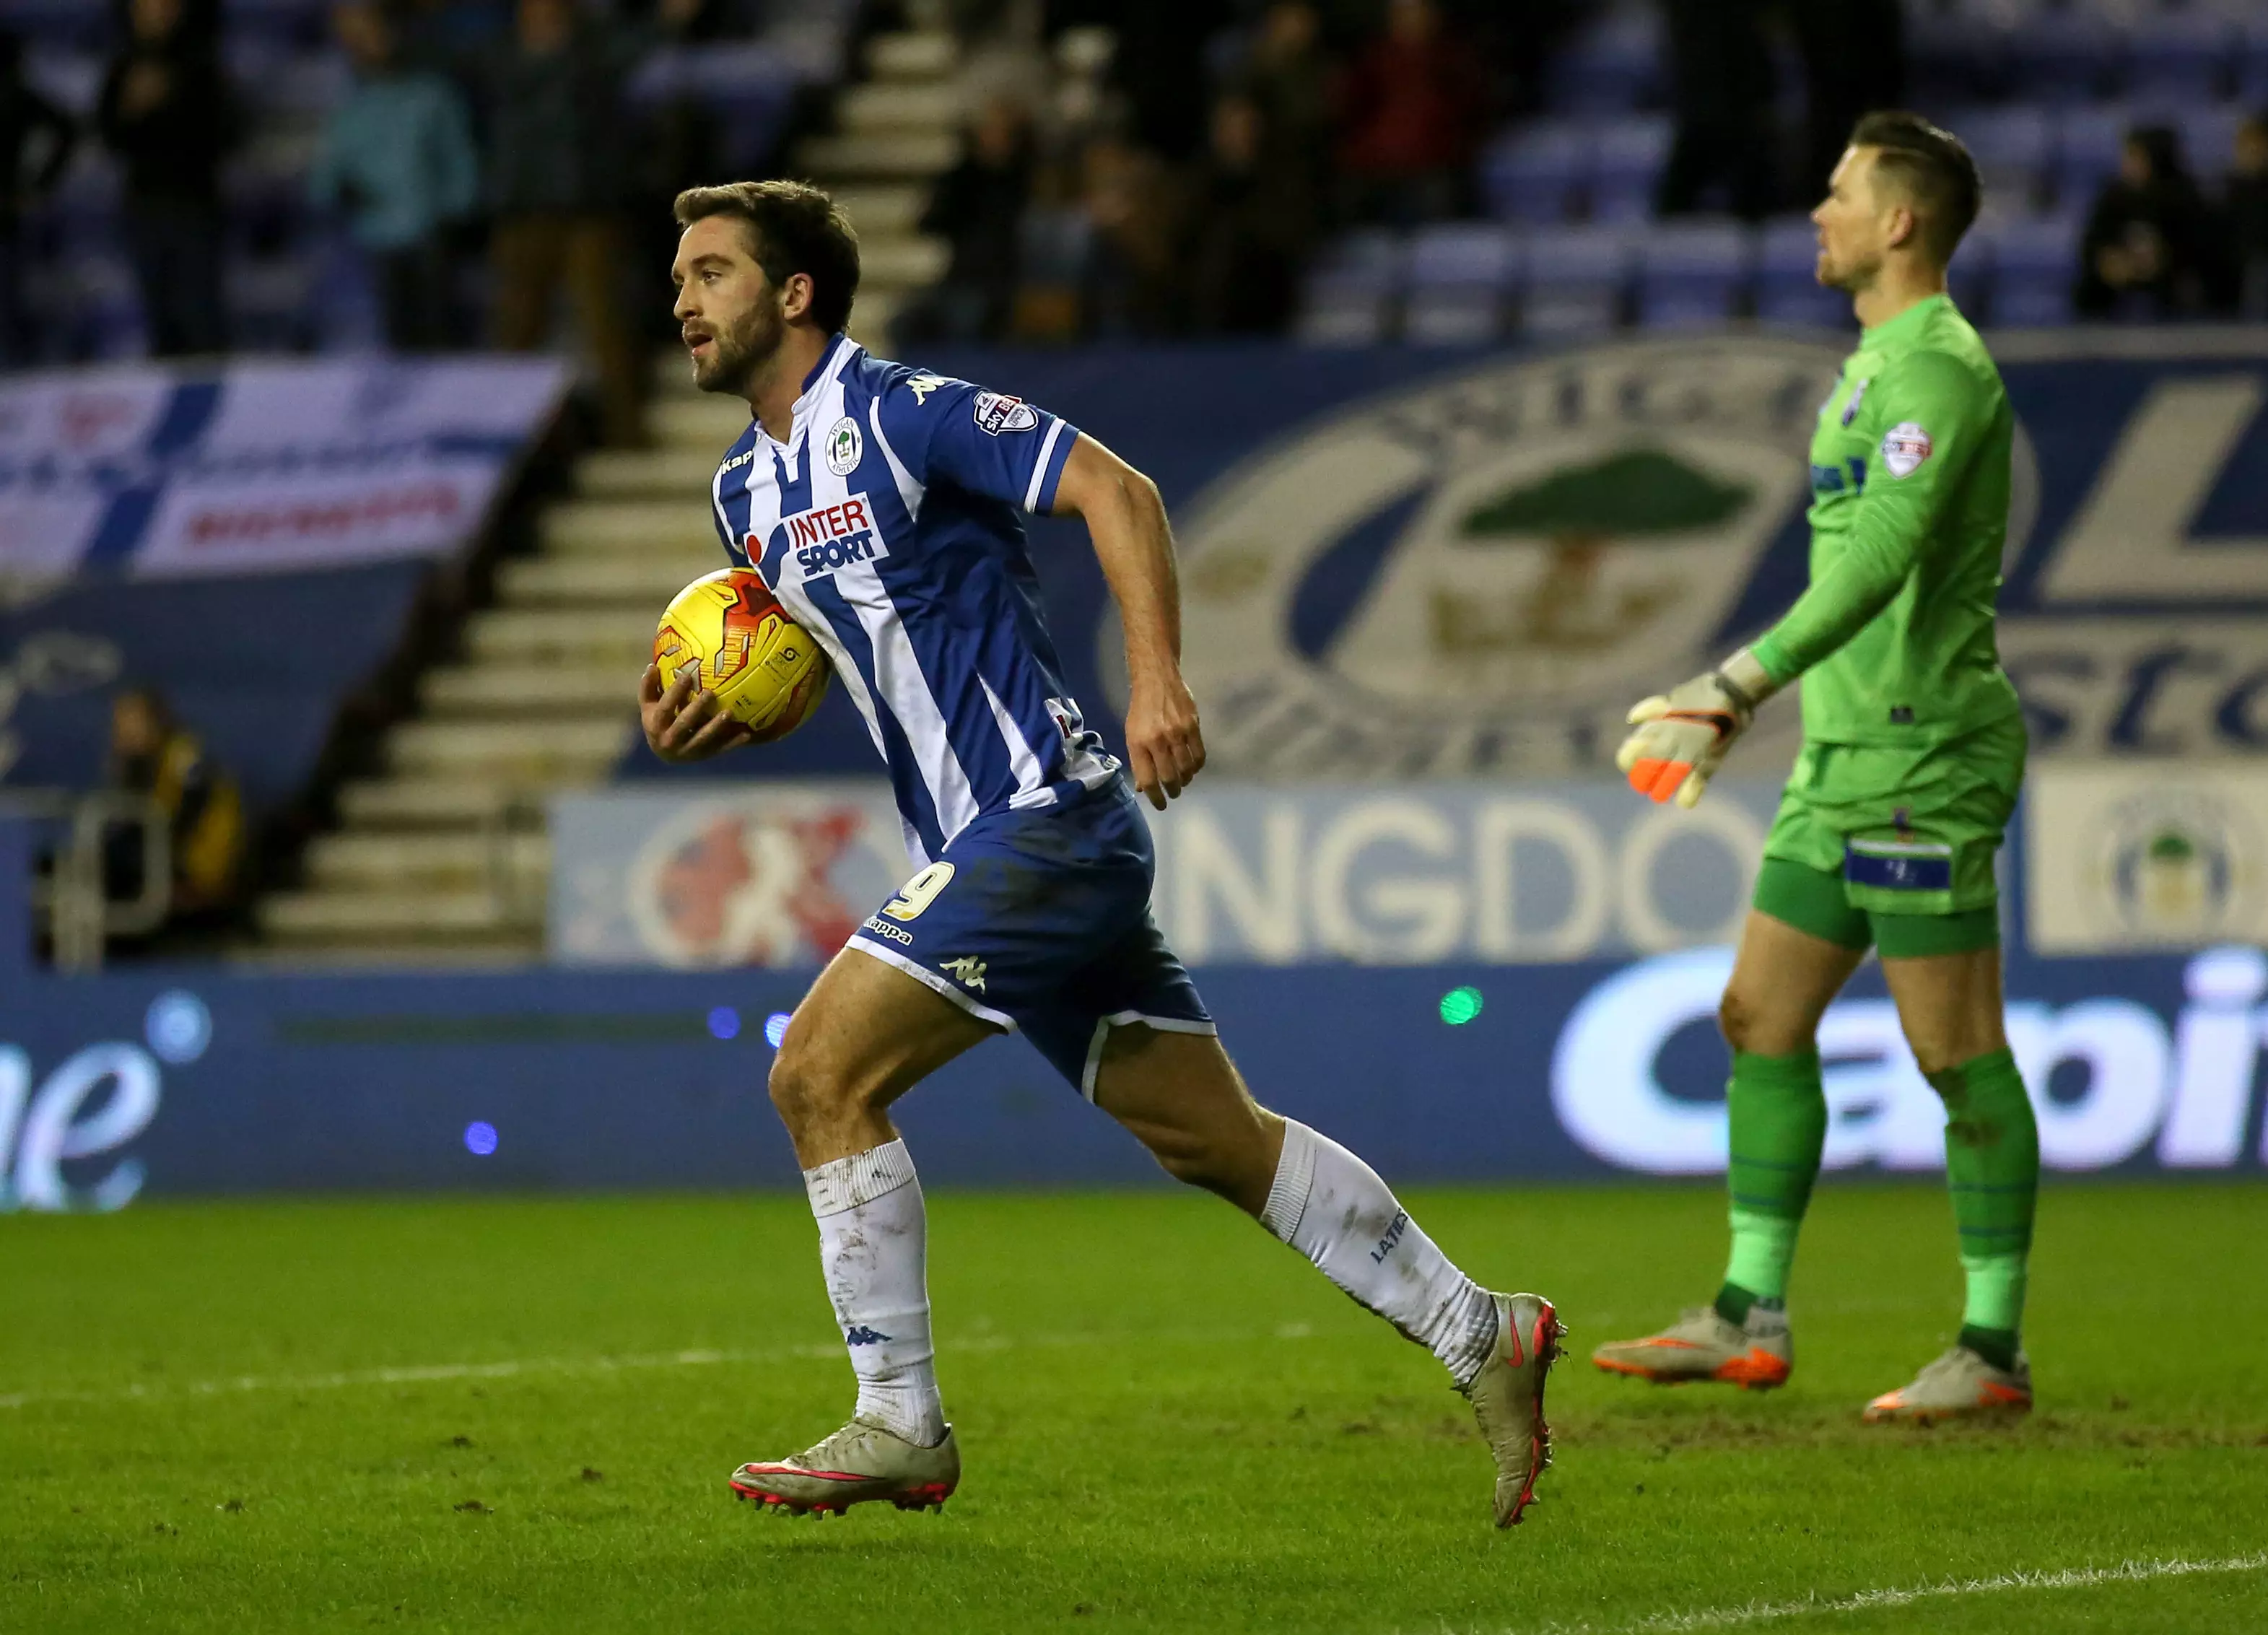 Will Grigg's On Fire Is Heading For The UK Number One Spot